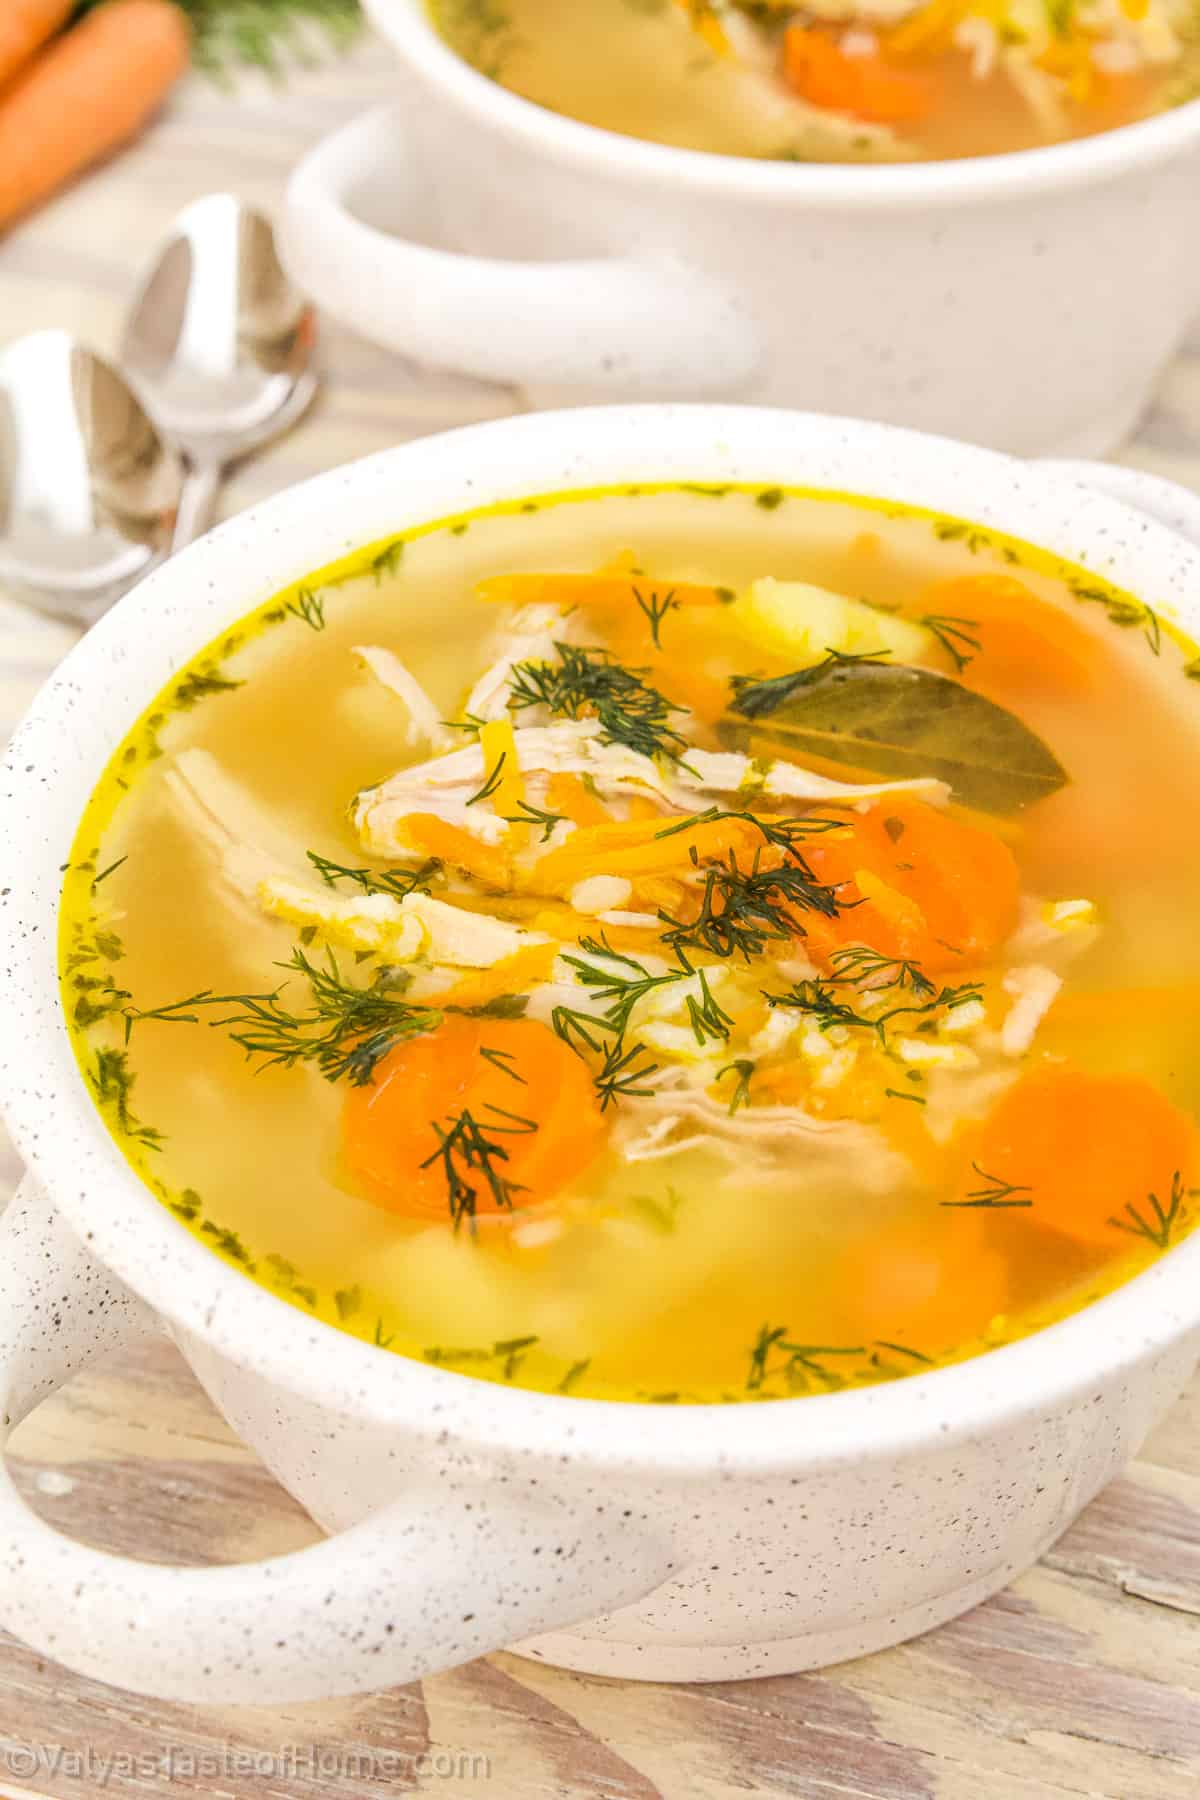 If you are lucky to have leftovers, this is one of the best things to do with them. This soup is filling yet light enough to fully enjoy after a heavy holiday meal! The flavors are robust and comforting for the perfect fall/winter soup.